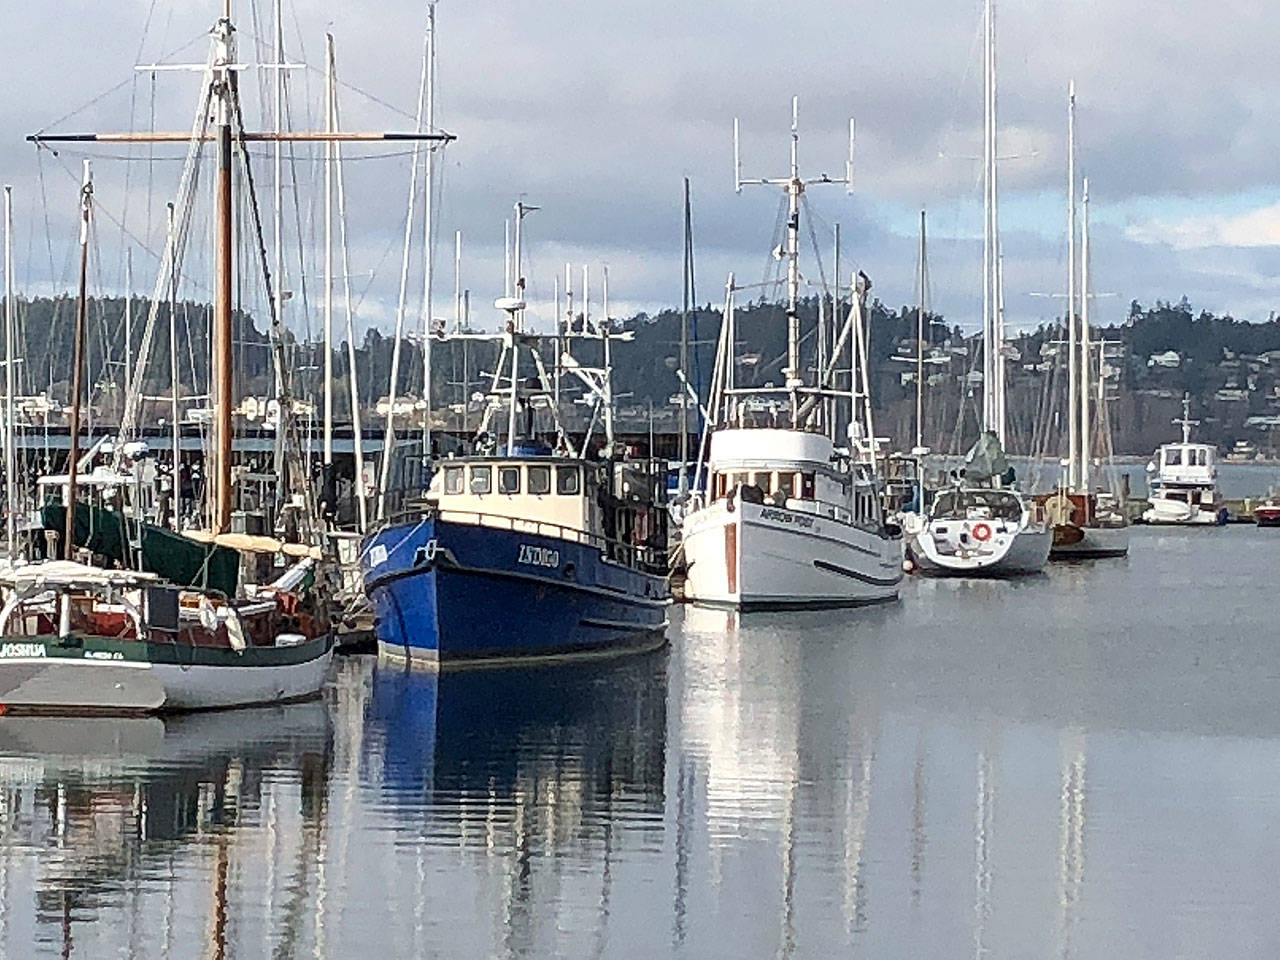 Proposed moorage rate increases at the Oak Harbor Marina may impact large boats the most. (Photo by Jessie Stensland / Whidbey News-Times)